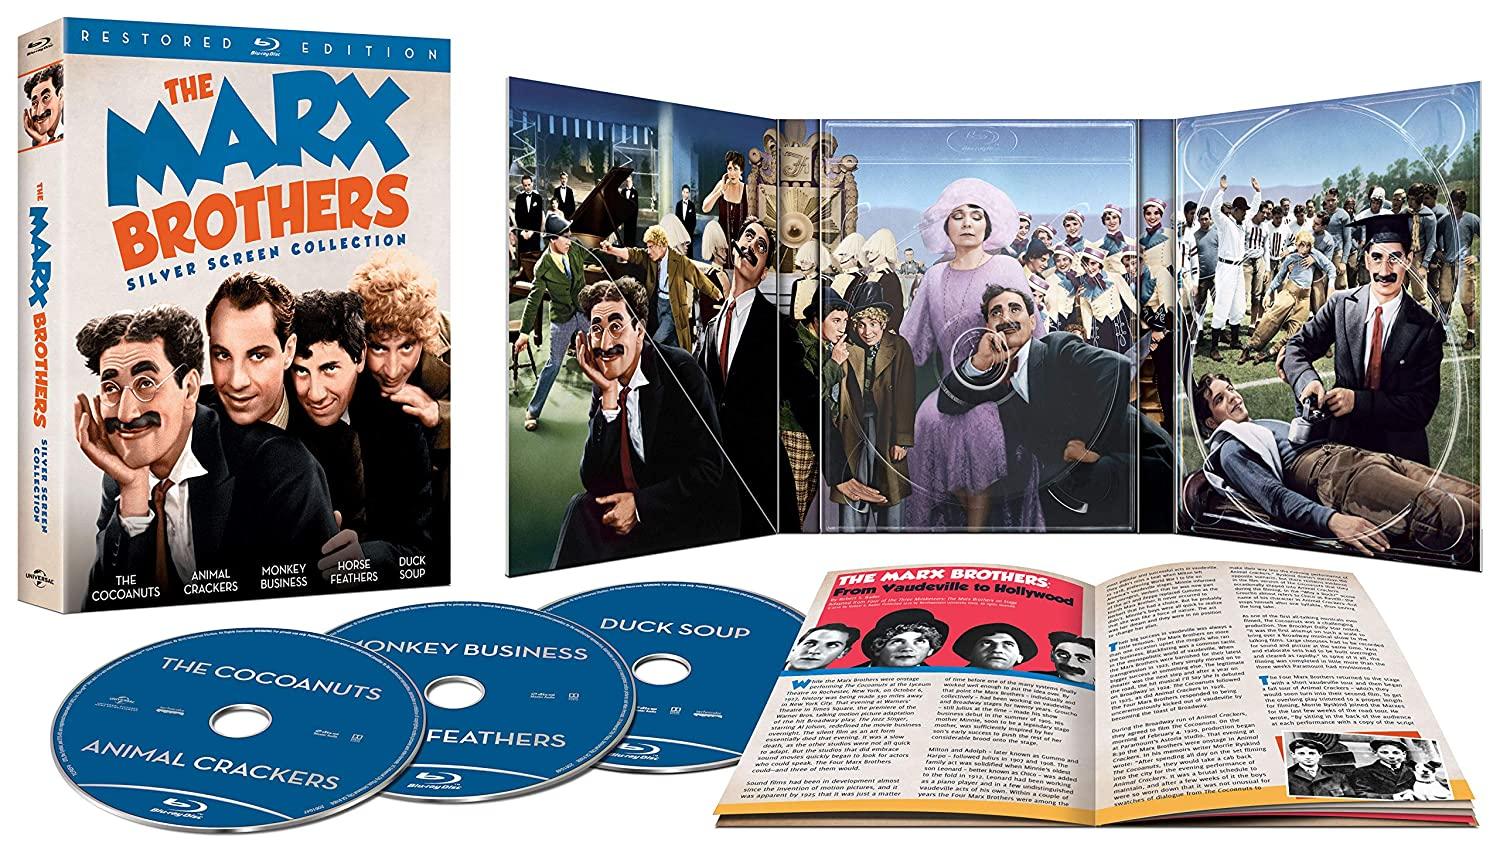 The Marx Brothers Silver Screen Collection Blu-ray for $14.99